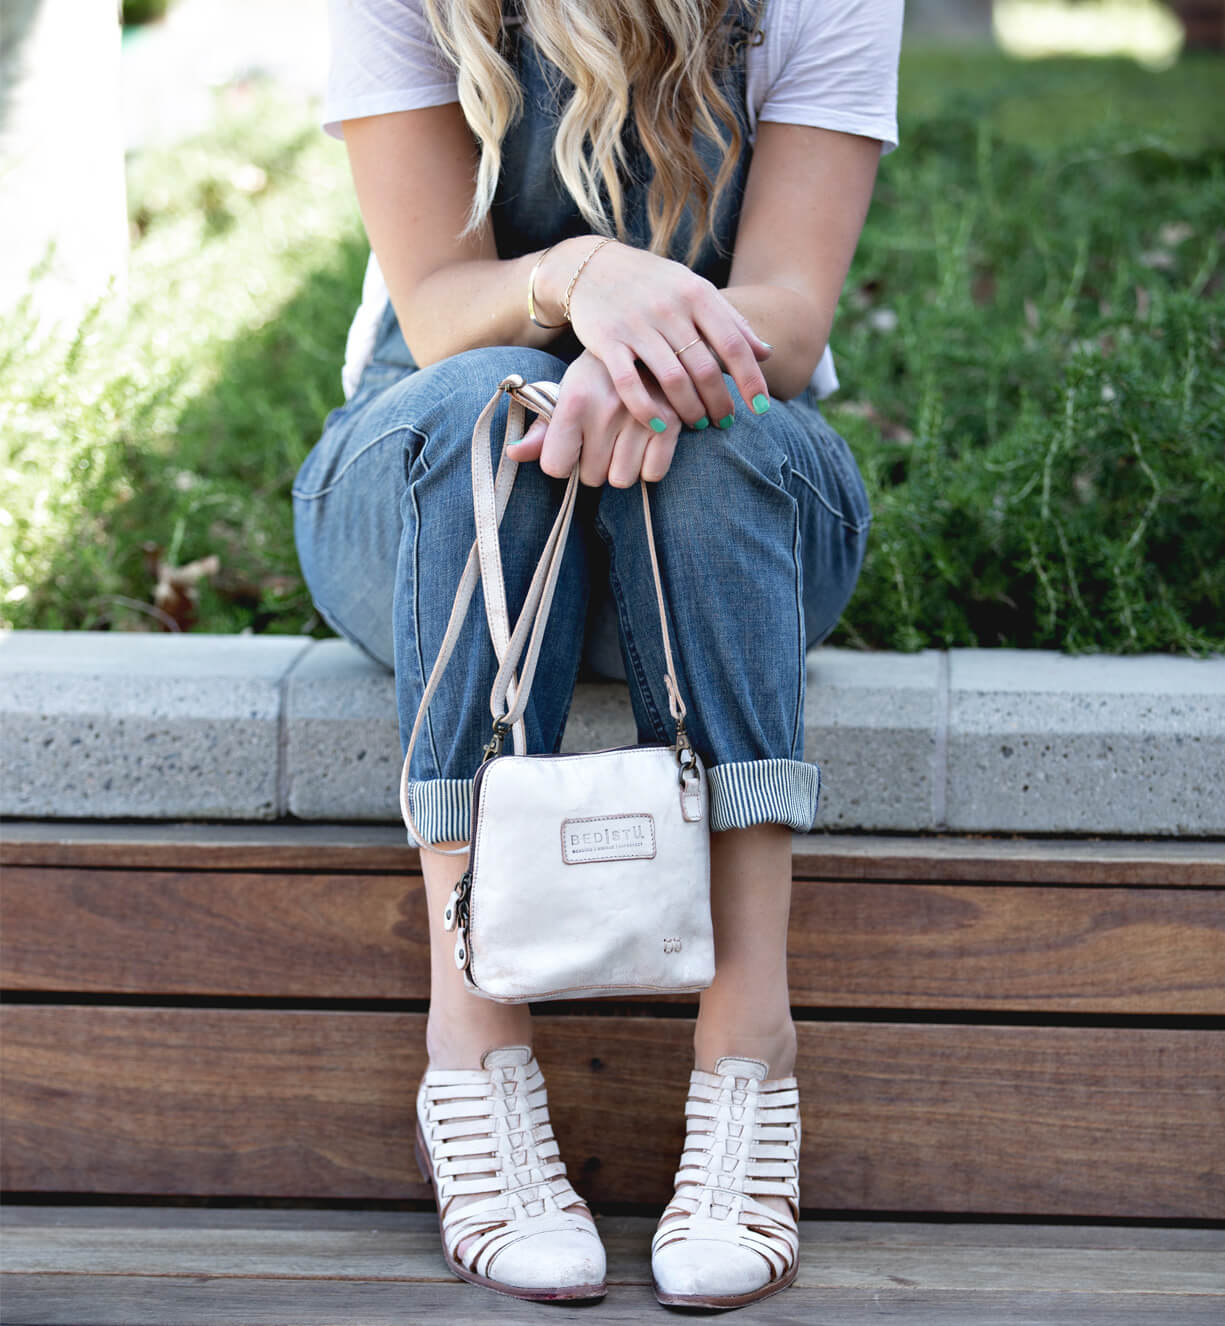 A blonde woman sitting on a bench holding a white Ventura purse by Bed Stu.